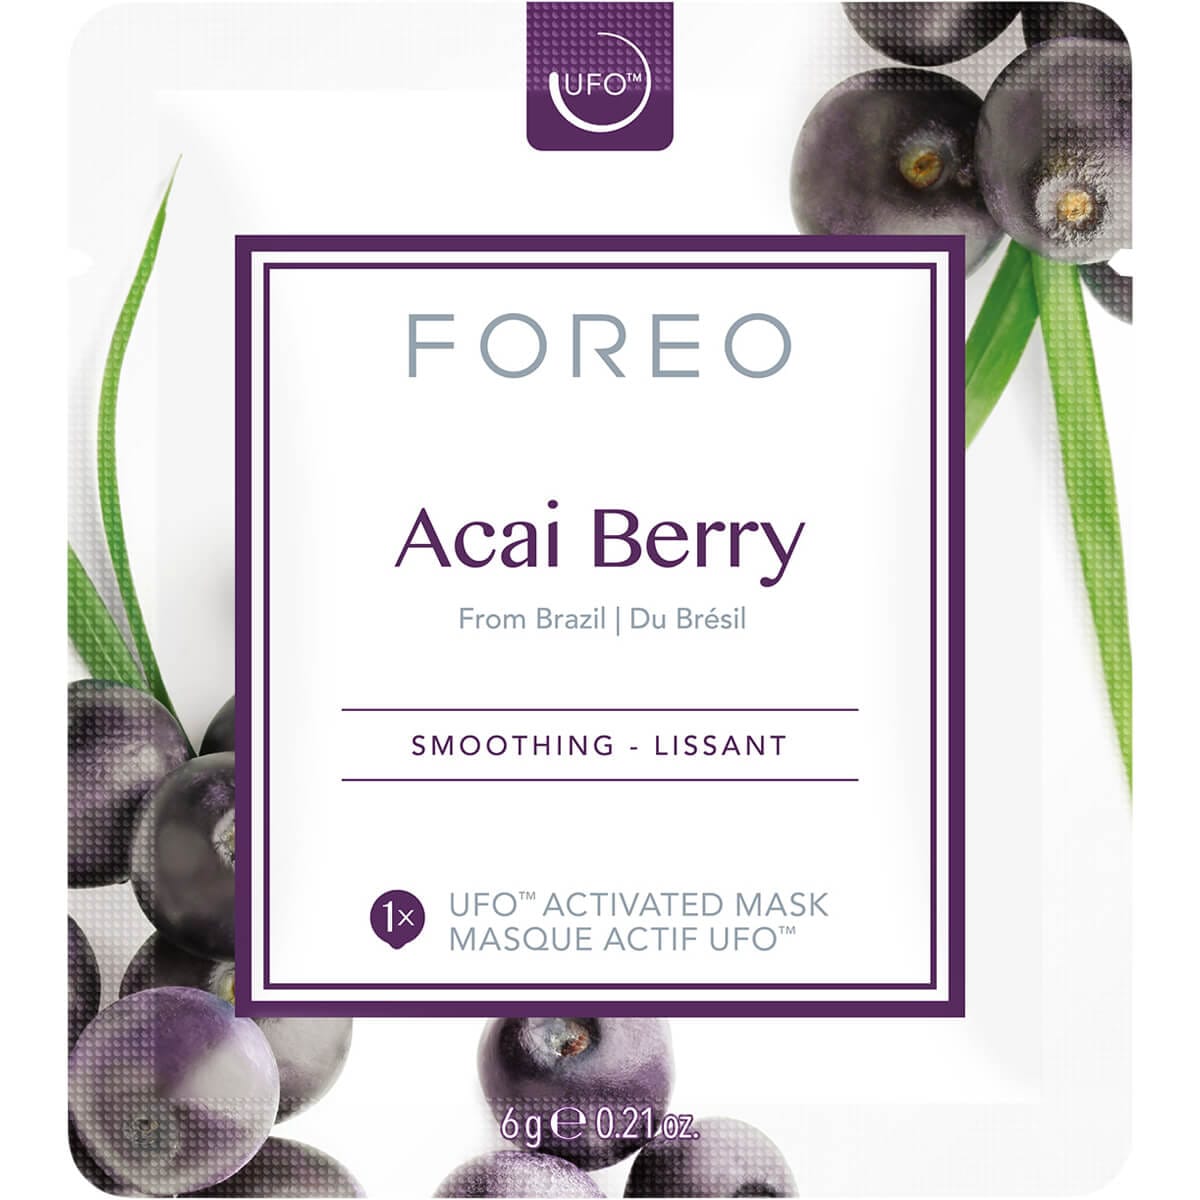 - Coconut CurrentBody to Face Farm FOREO Oil Mask Collection |